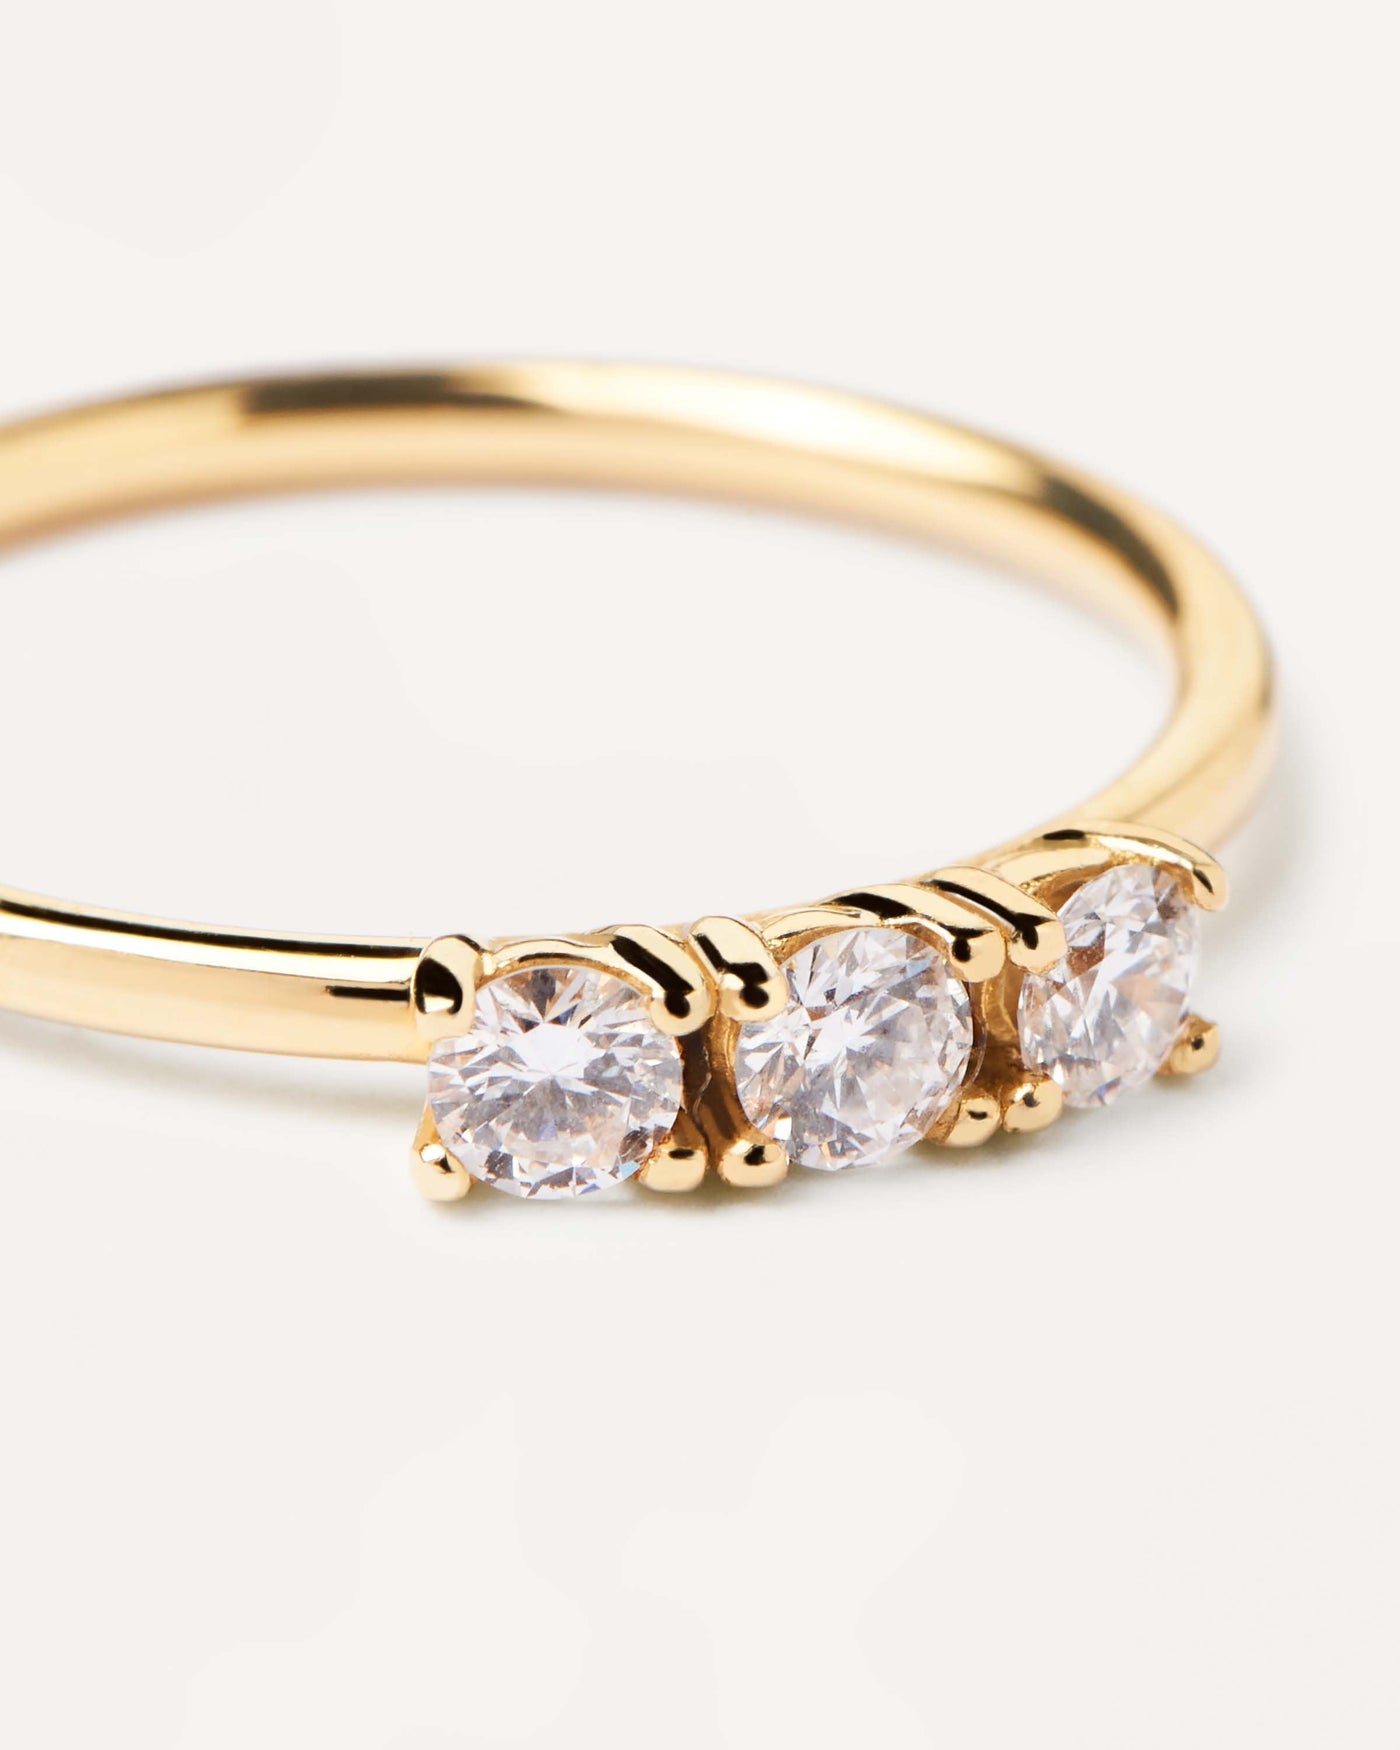 2023 Selection | Diamonds and gold Trio Ring. Solid yellow gold ring with three lab-grown diamonds in rounded cut, equaling 0.03 carats. Get the latest arrival from PDPAOLA. Place your order safely and get this Best Seller. Free Shipping.